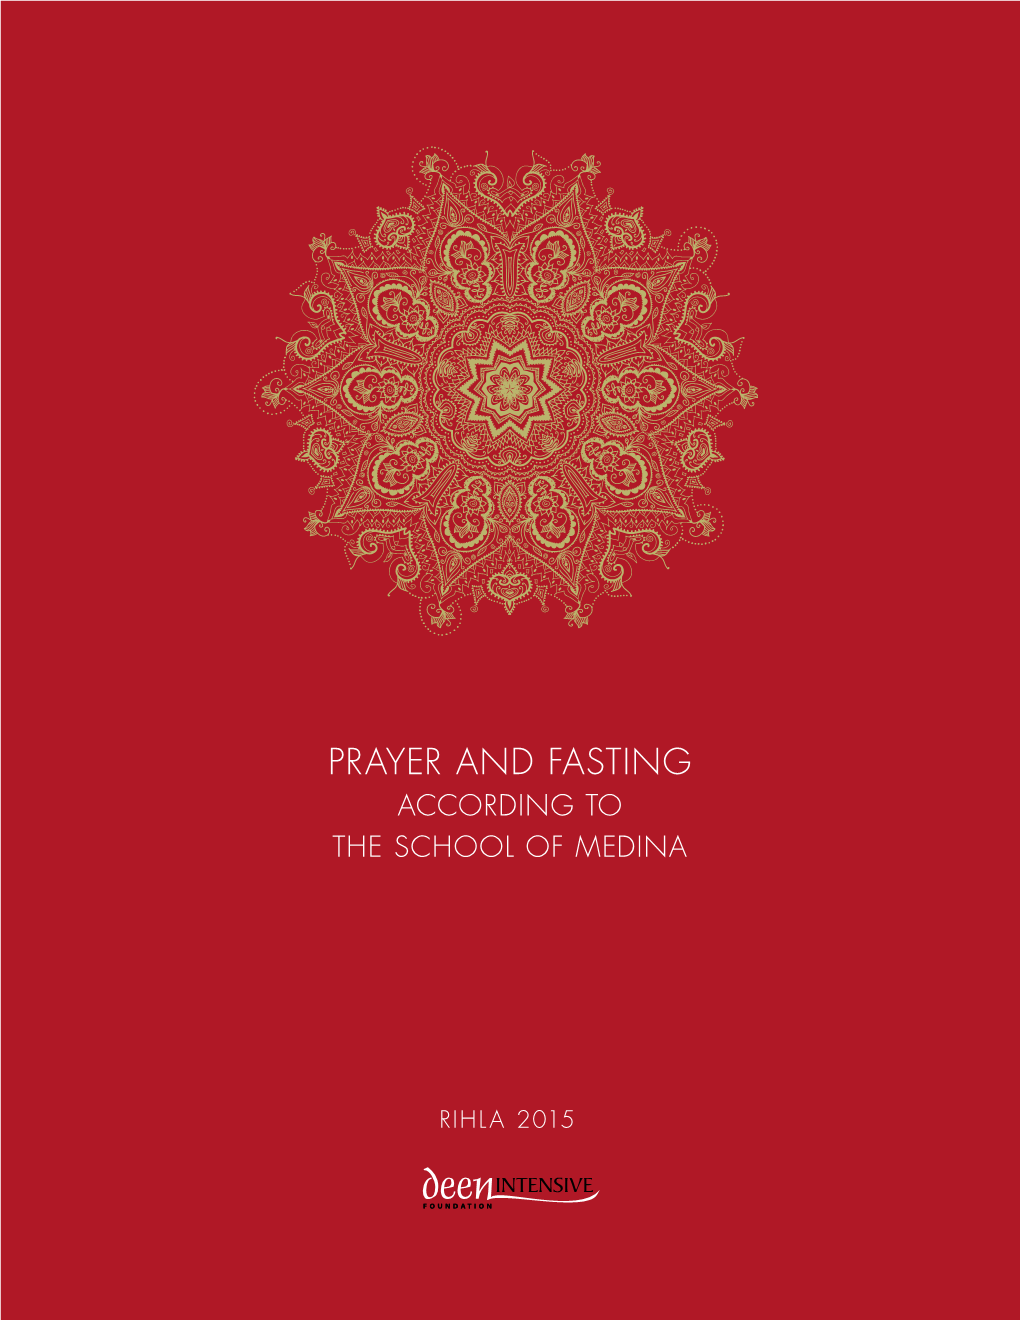 Prayer and Fasting According to the School of Medina